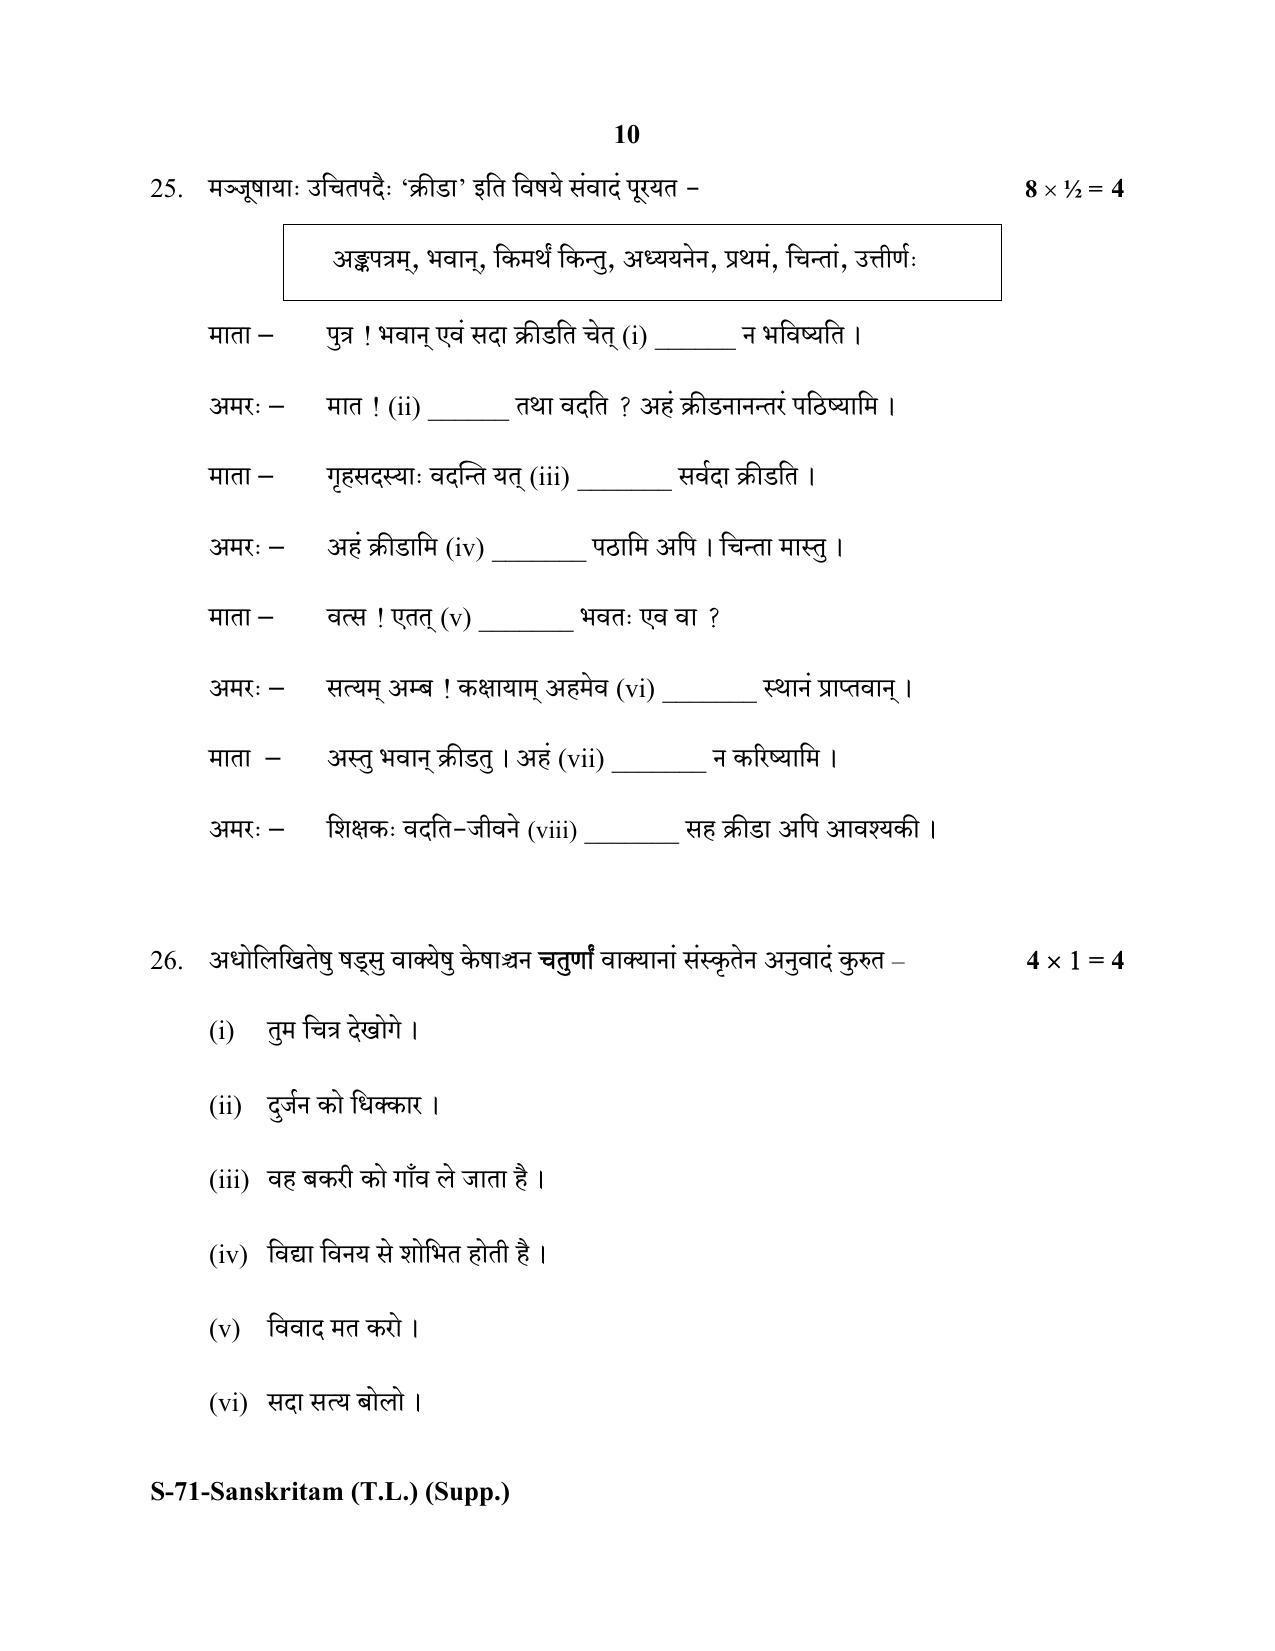 RBSE Class 10 Sanskrit TL Supplementary 2020 Question Paper - Page 10